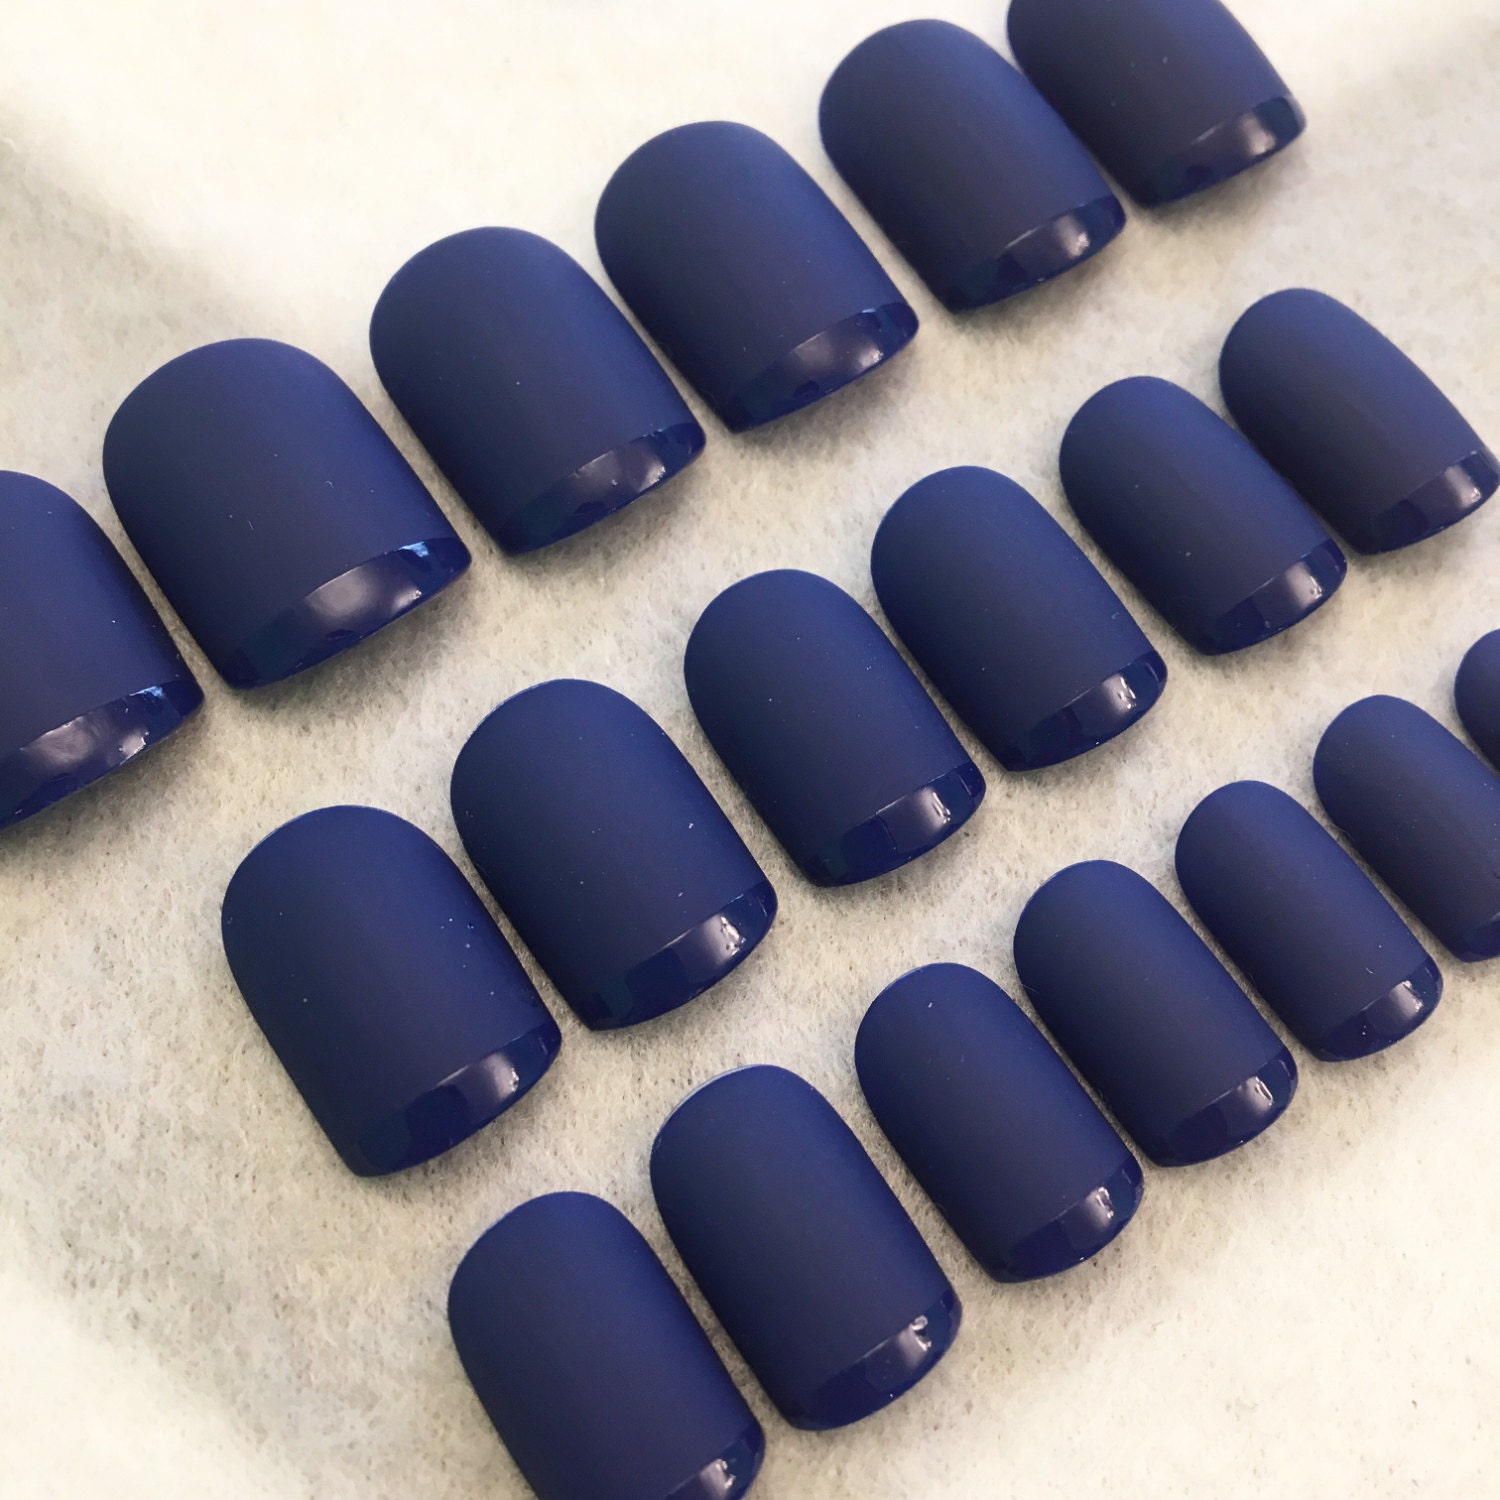 Matte Navy Squoval Faux Nails Gloss Navy Tips Squoval